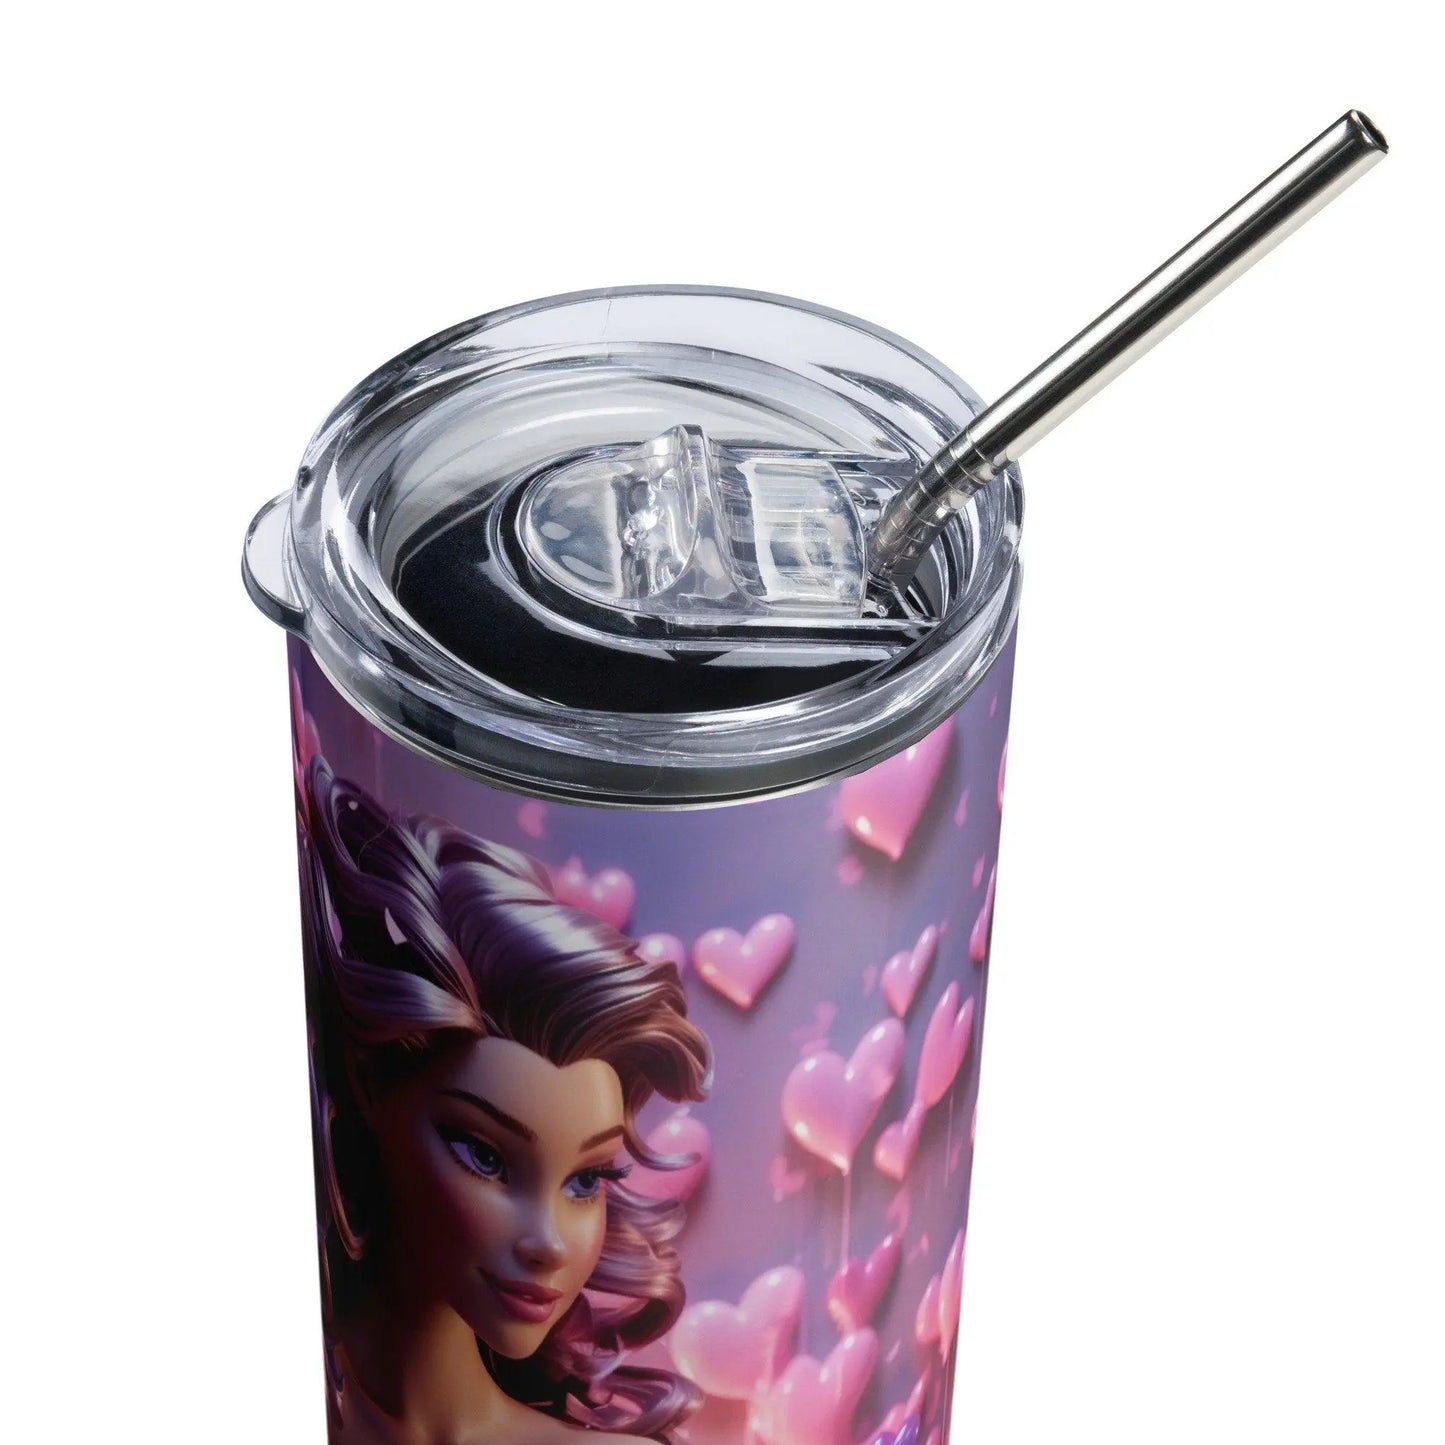 Elegant Barbie Stainless Steel Tumbler - Whimsical Patterns & Floating Hearts - Hot and Cold Drinks On the Go!